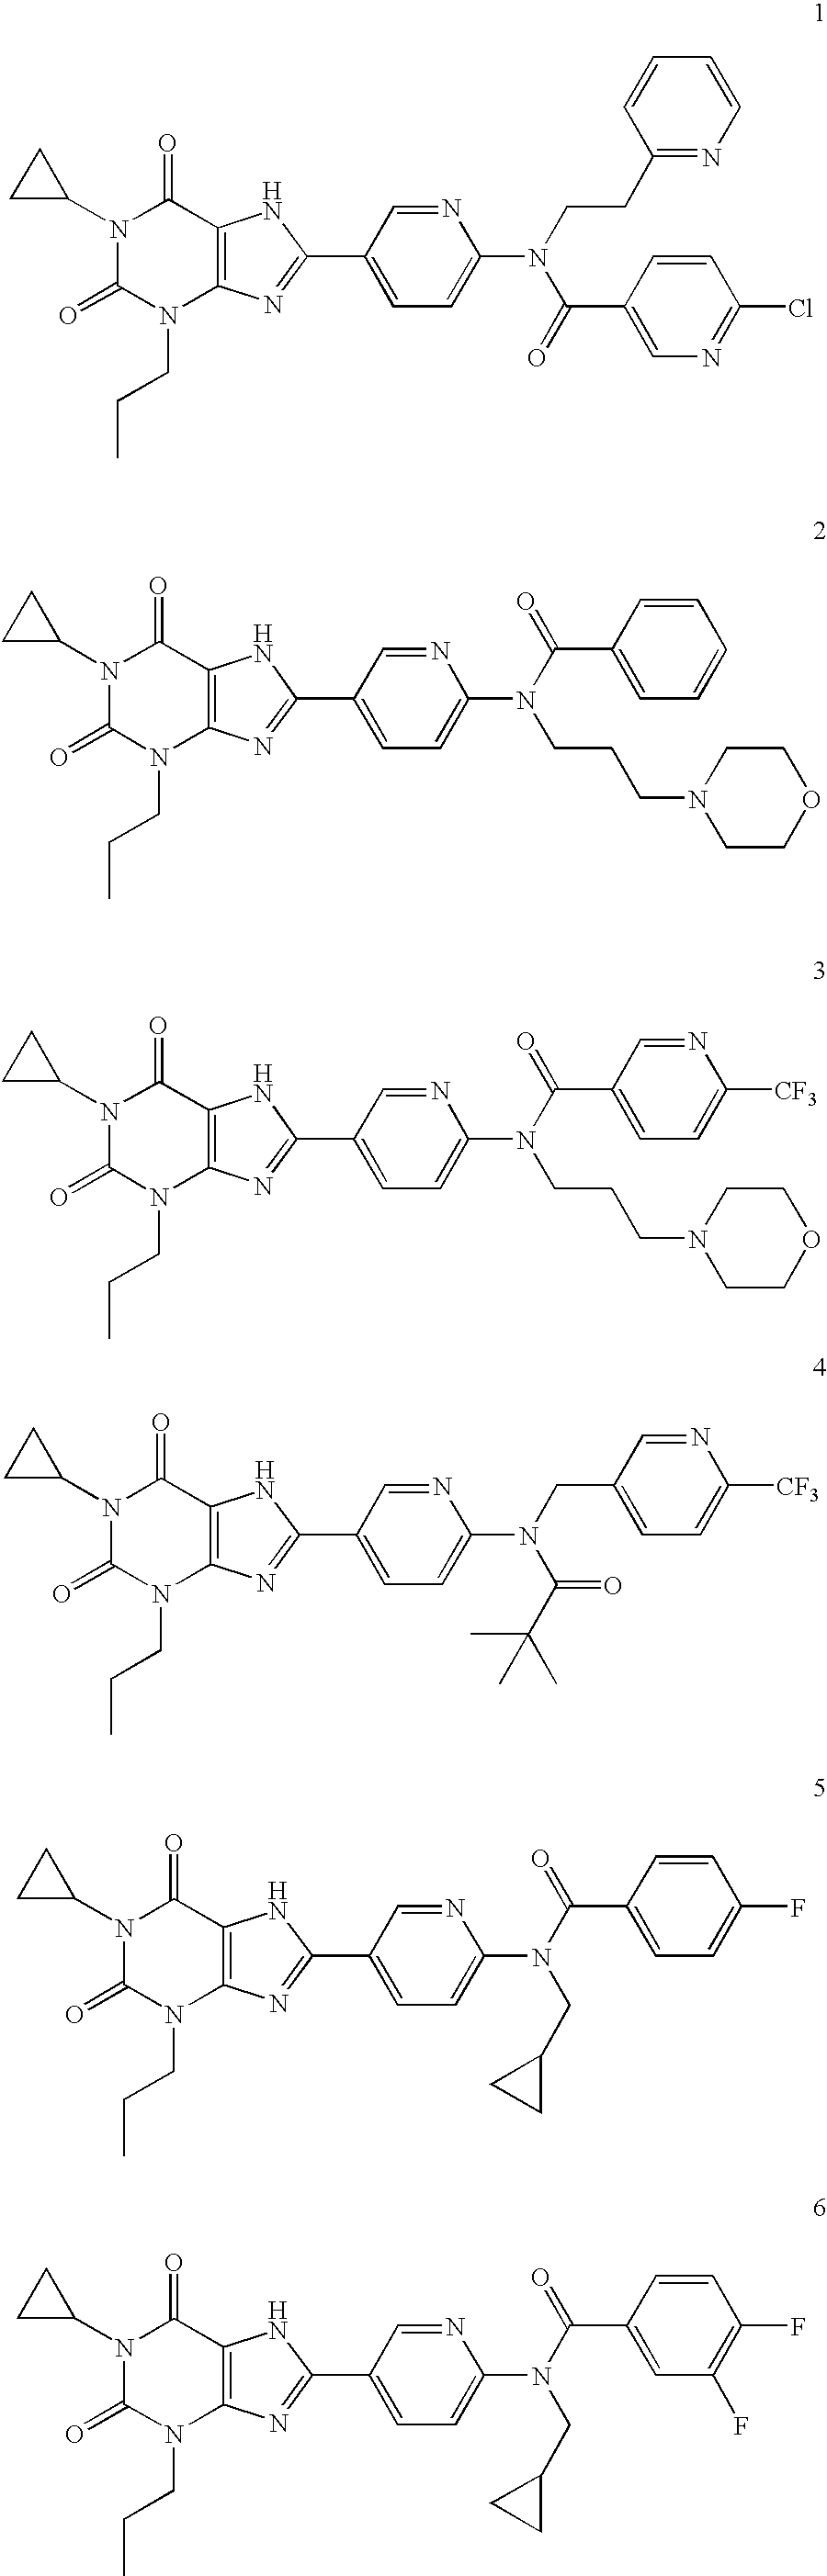 Substituted 8-[6-amino-3pyridyl]xanthines